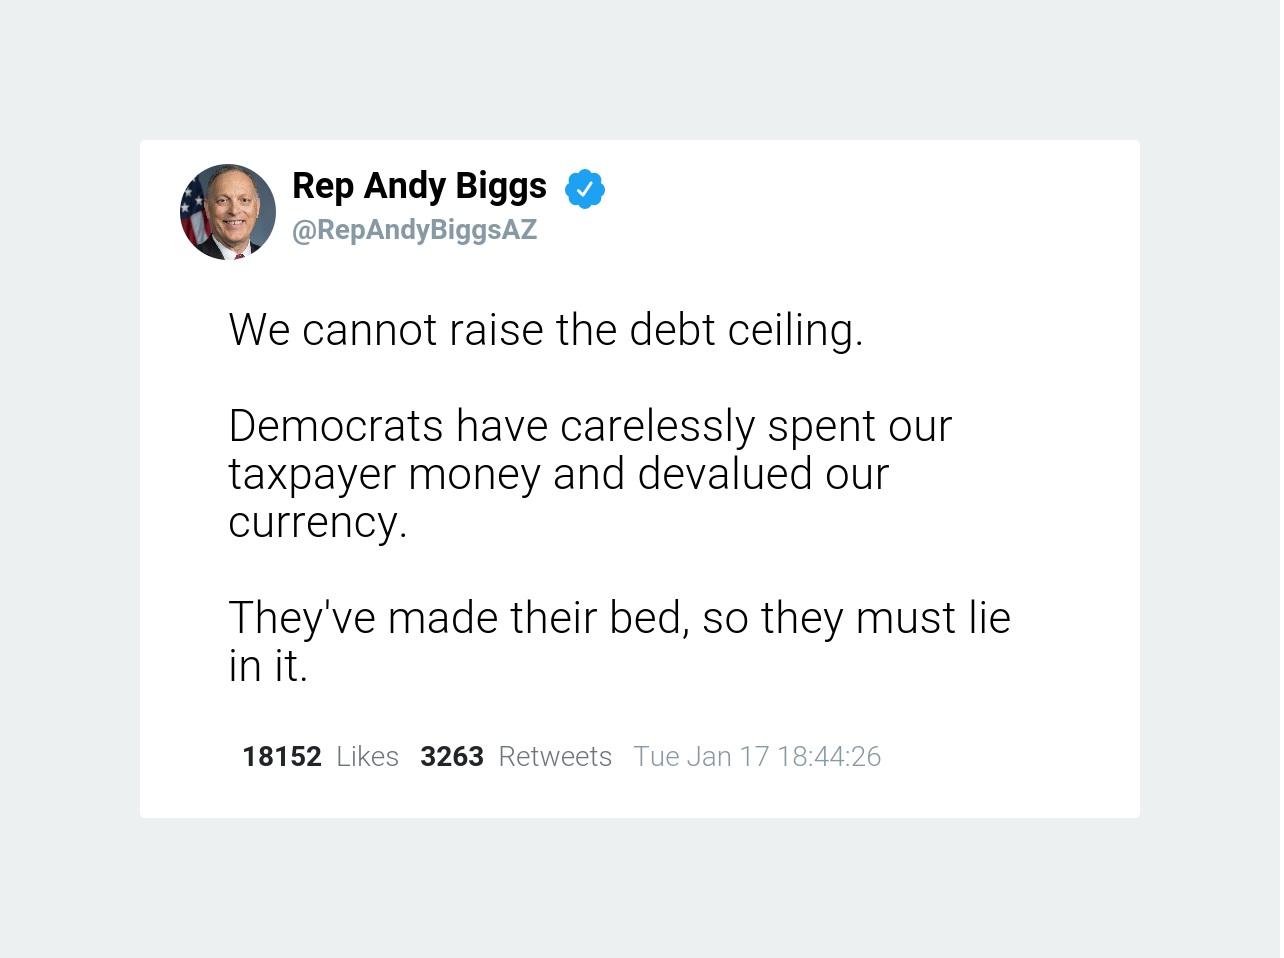 "We cannot raise the debt ceiling. Democrats have carelessly spent our taxpayer money and devalued our currency. They've made their bed, so they must lie in it."